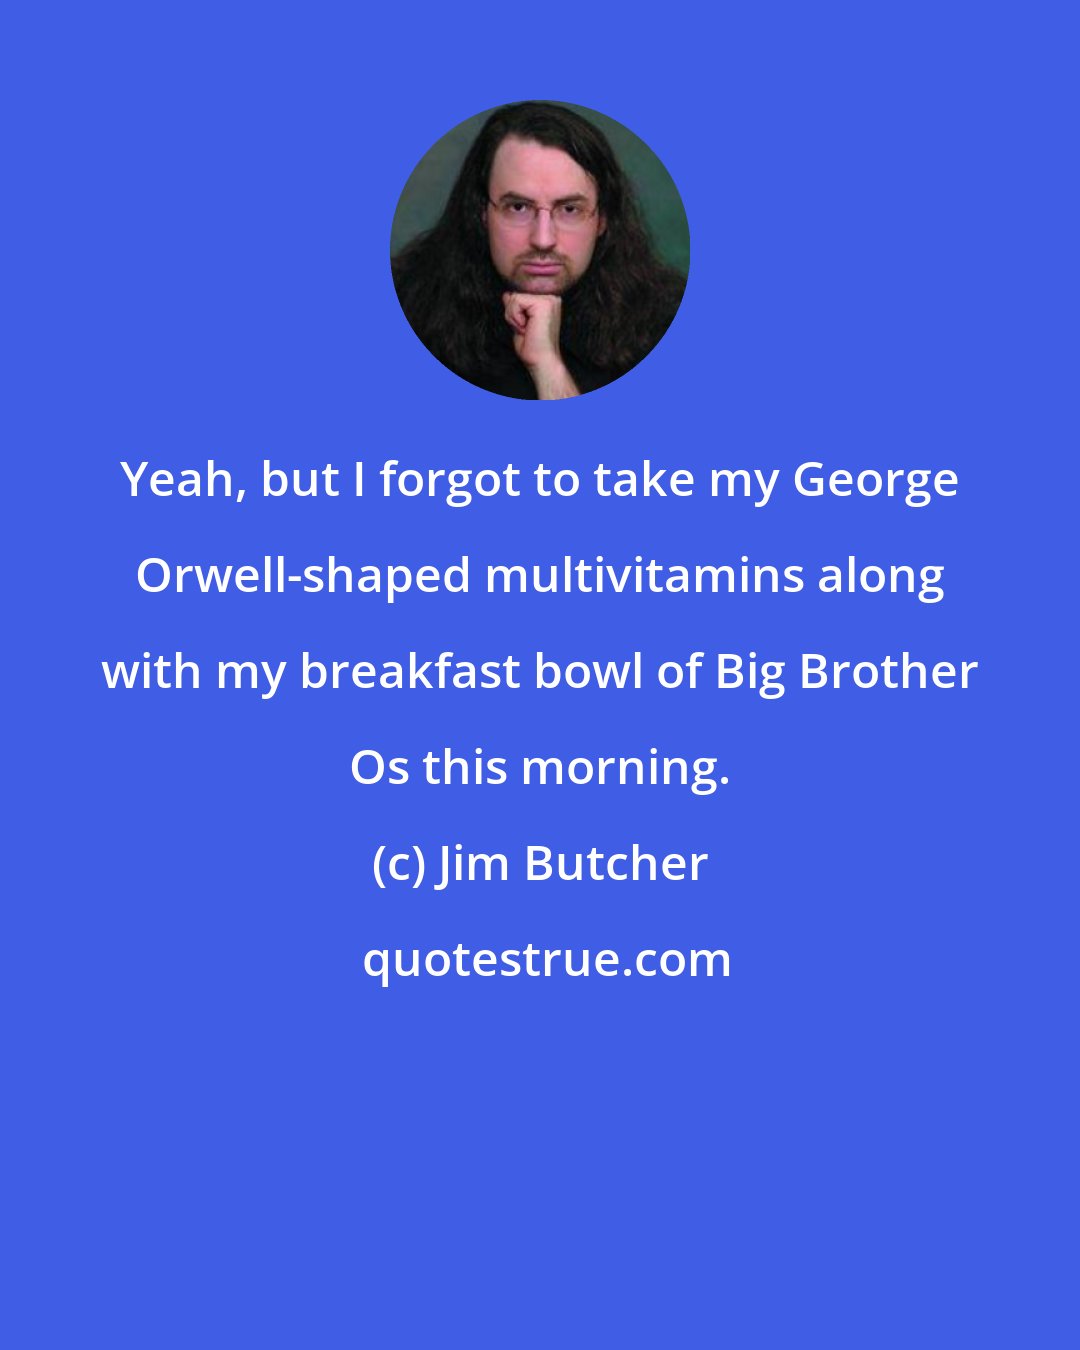 Jim Butcher: Yeah, but I forgot to take my George Orwell-shaped multivitamins along with my breakfast bowl of Big Brother Os this morning.